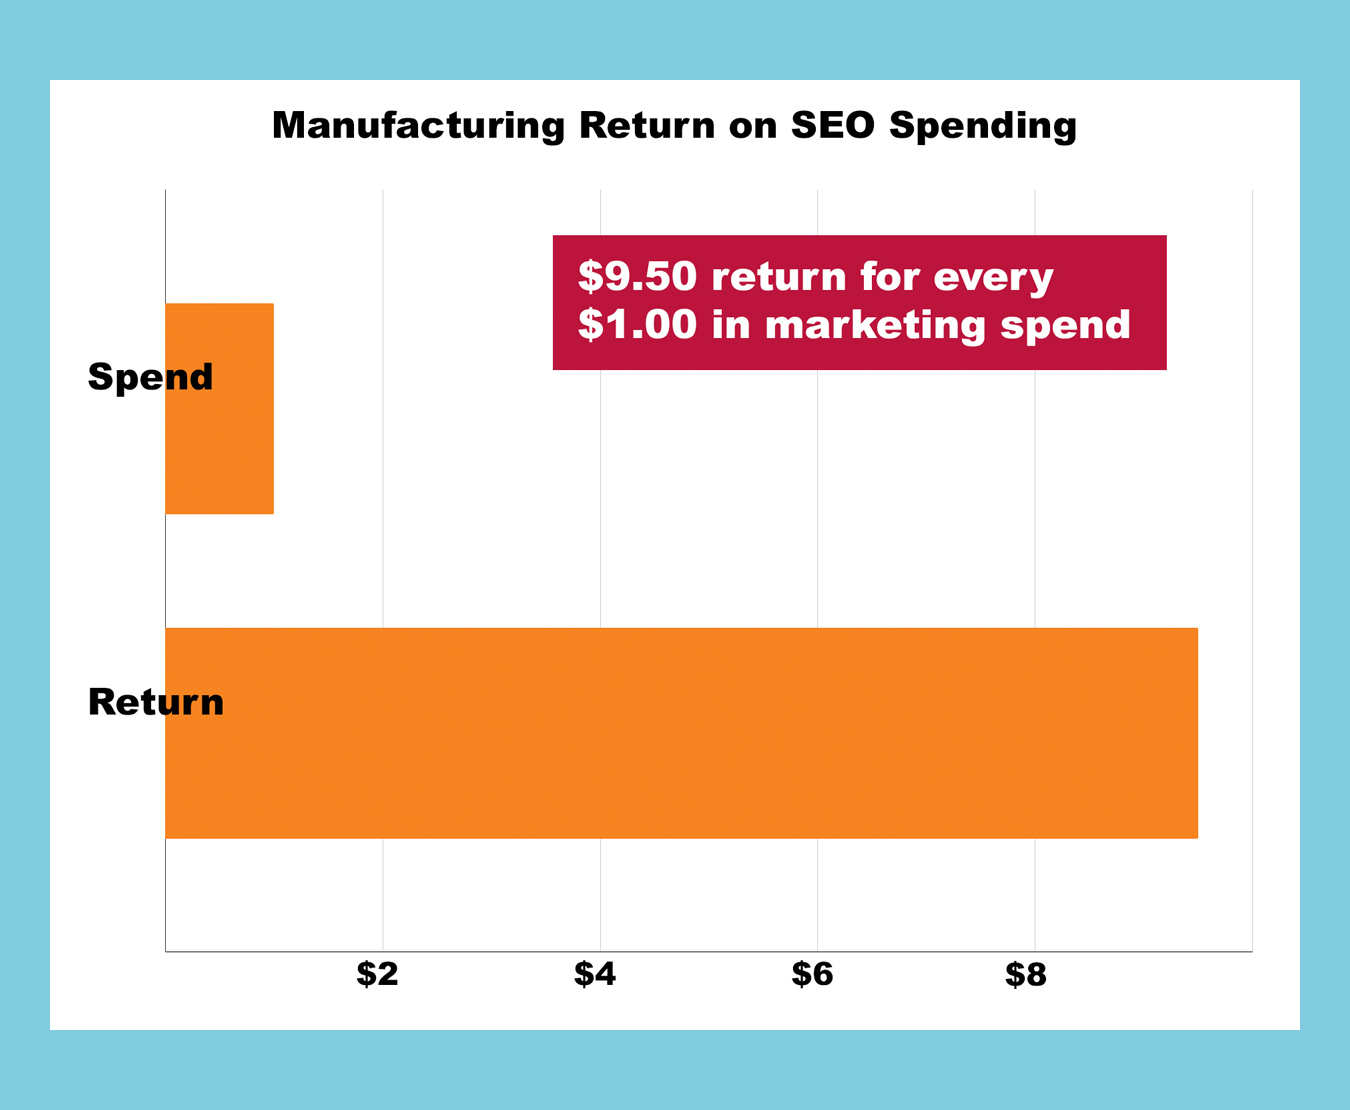 SEO for industrial manufacturing makes sense with a return on marketing spending of $9.50 for every $1.00 spent on manufacturing SEO